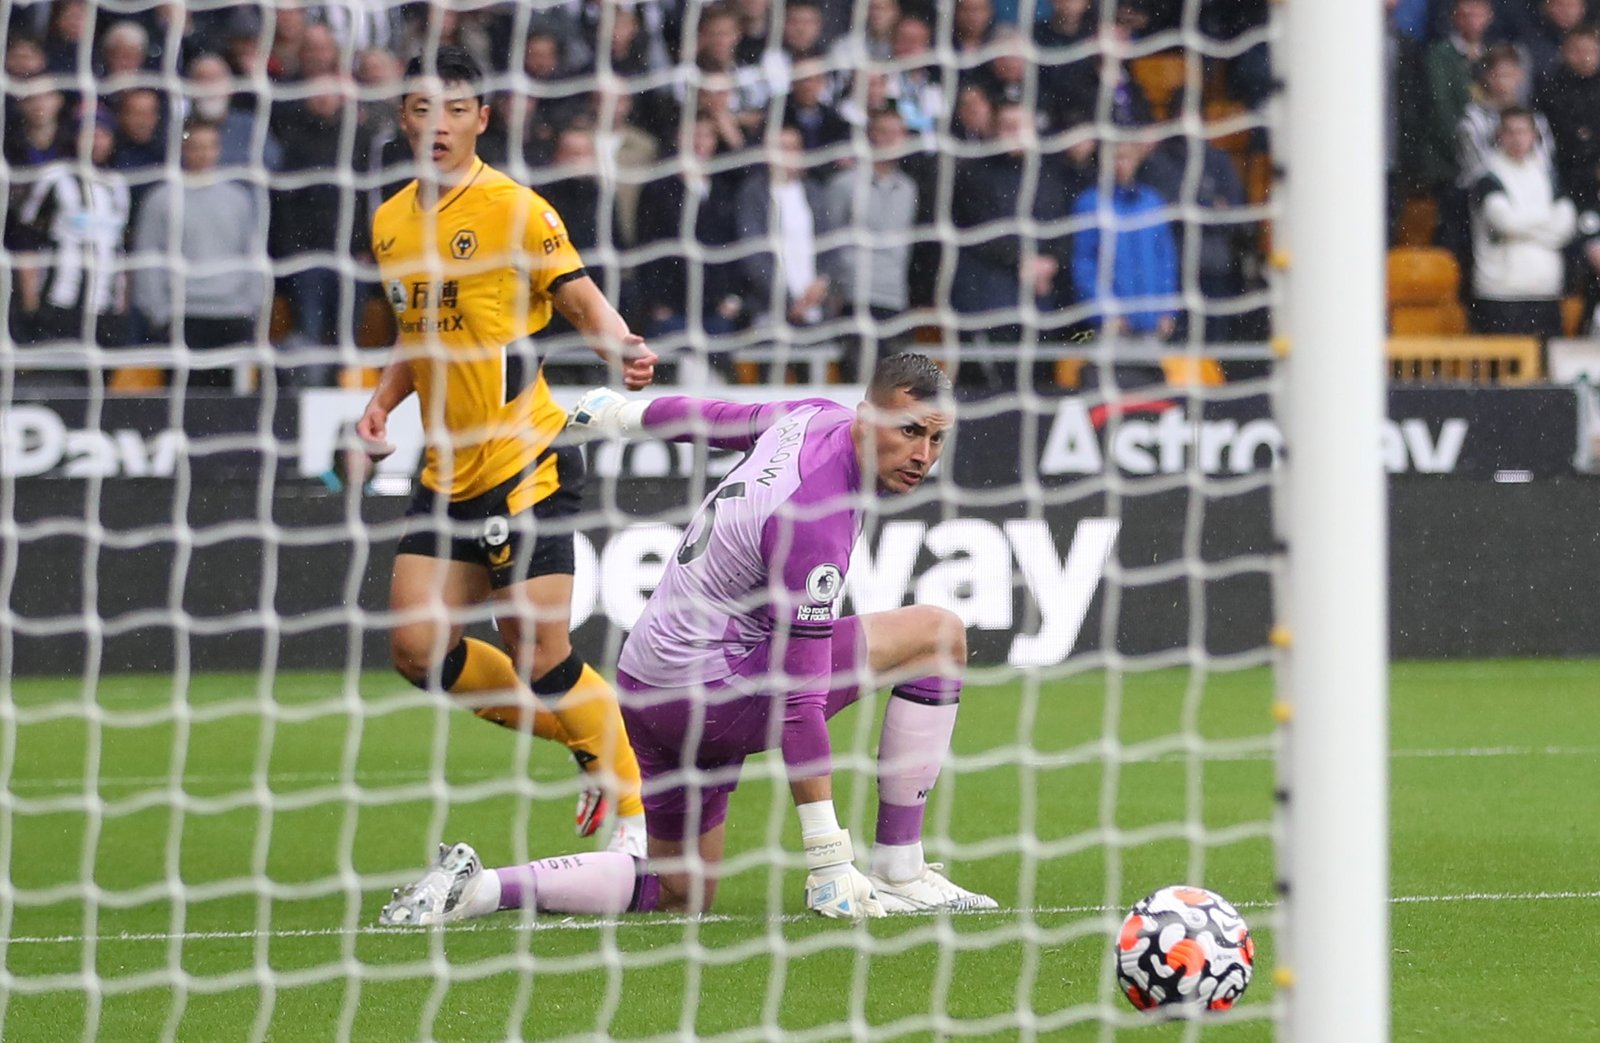 Wolves 2 - 1 Newcastle